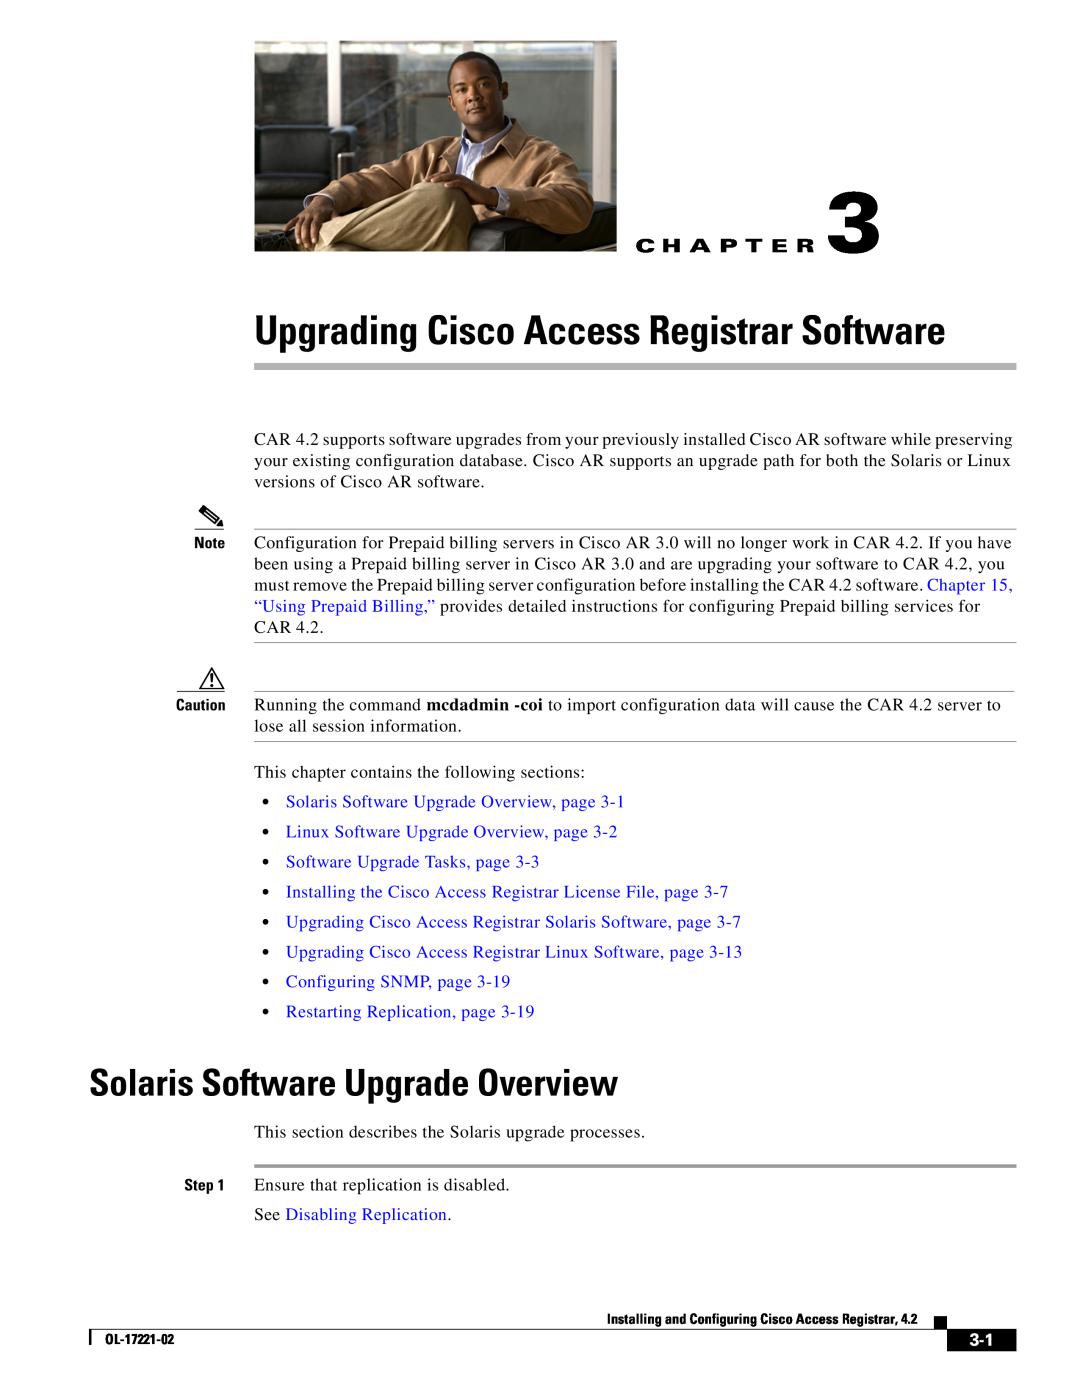 Cisco Systems 4.2 Solaris Software Upgrade Overview, page, Installing the Cisco Access Registrar License File, page 